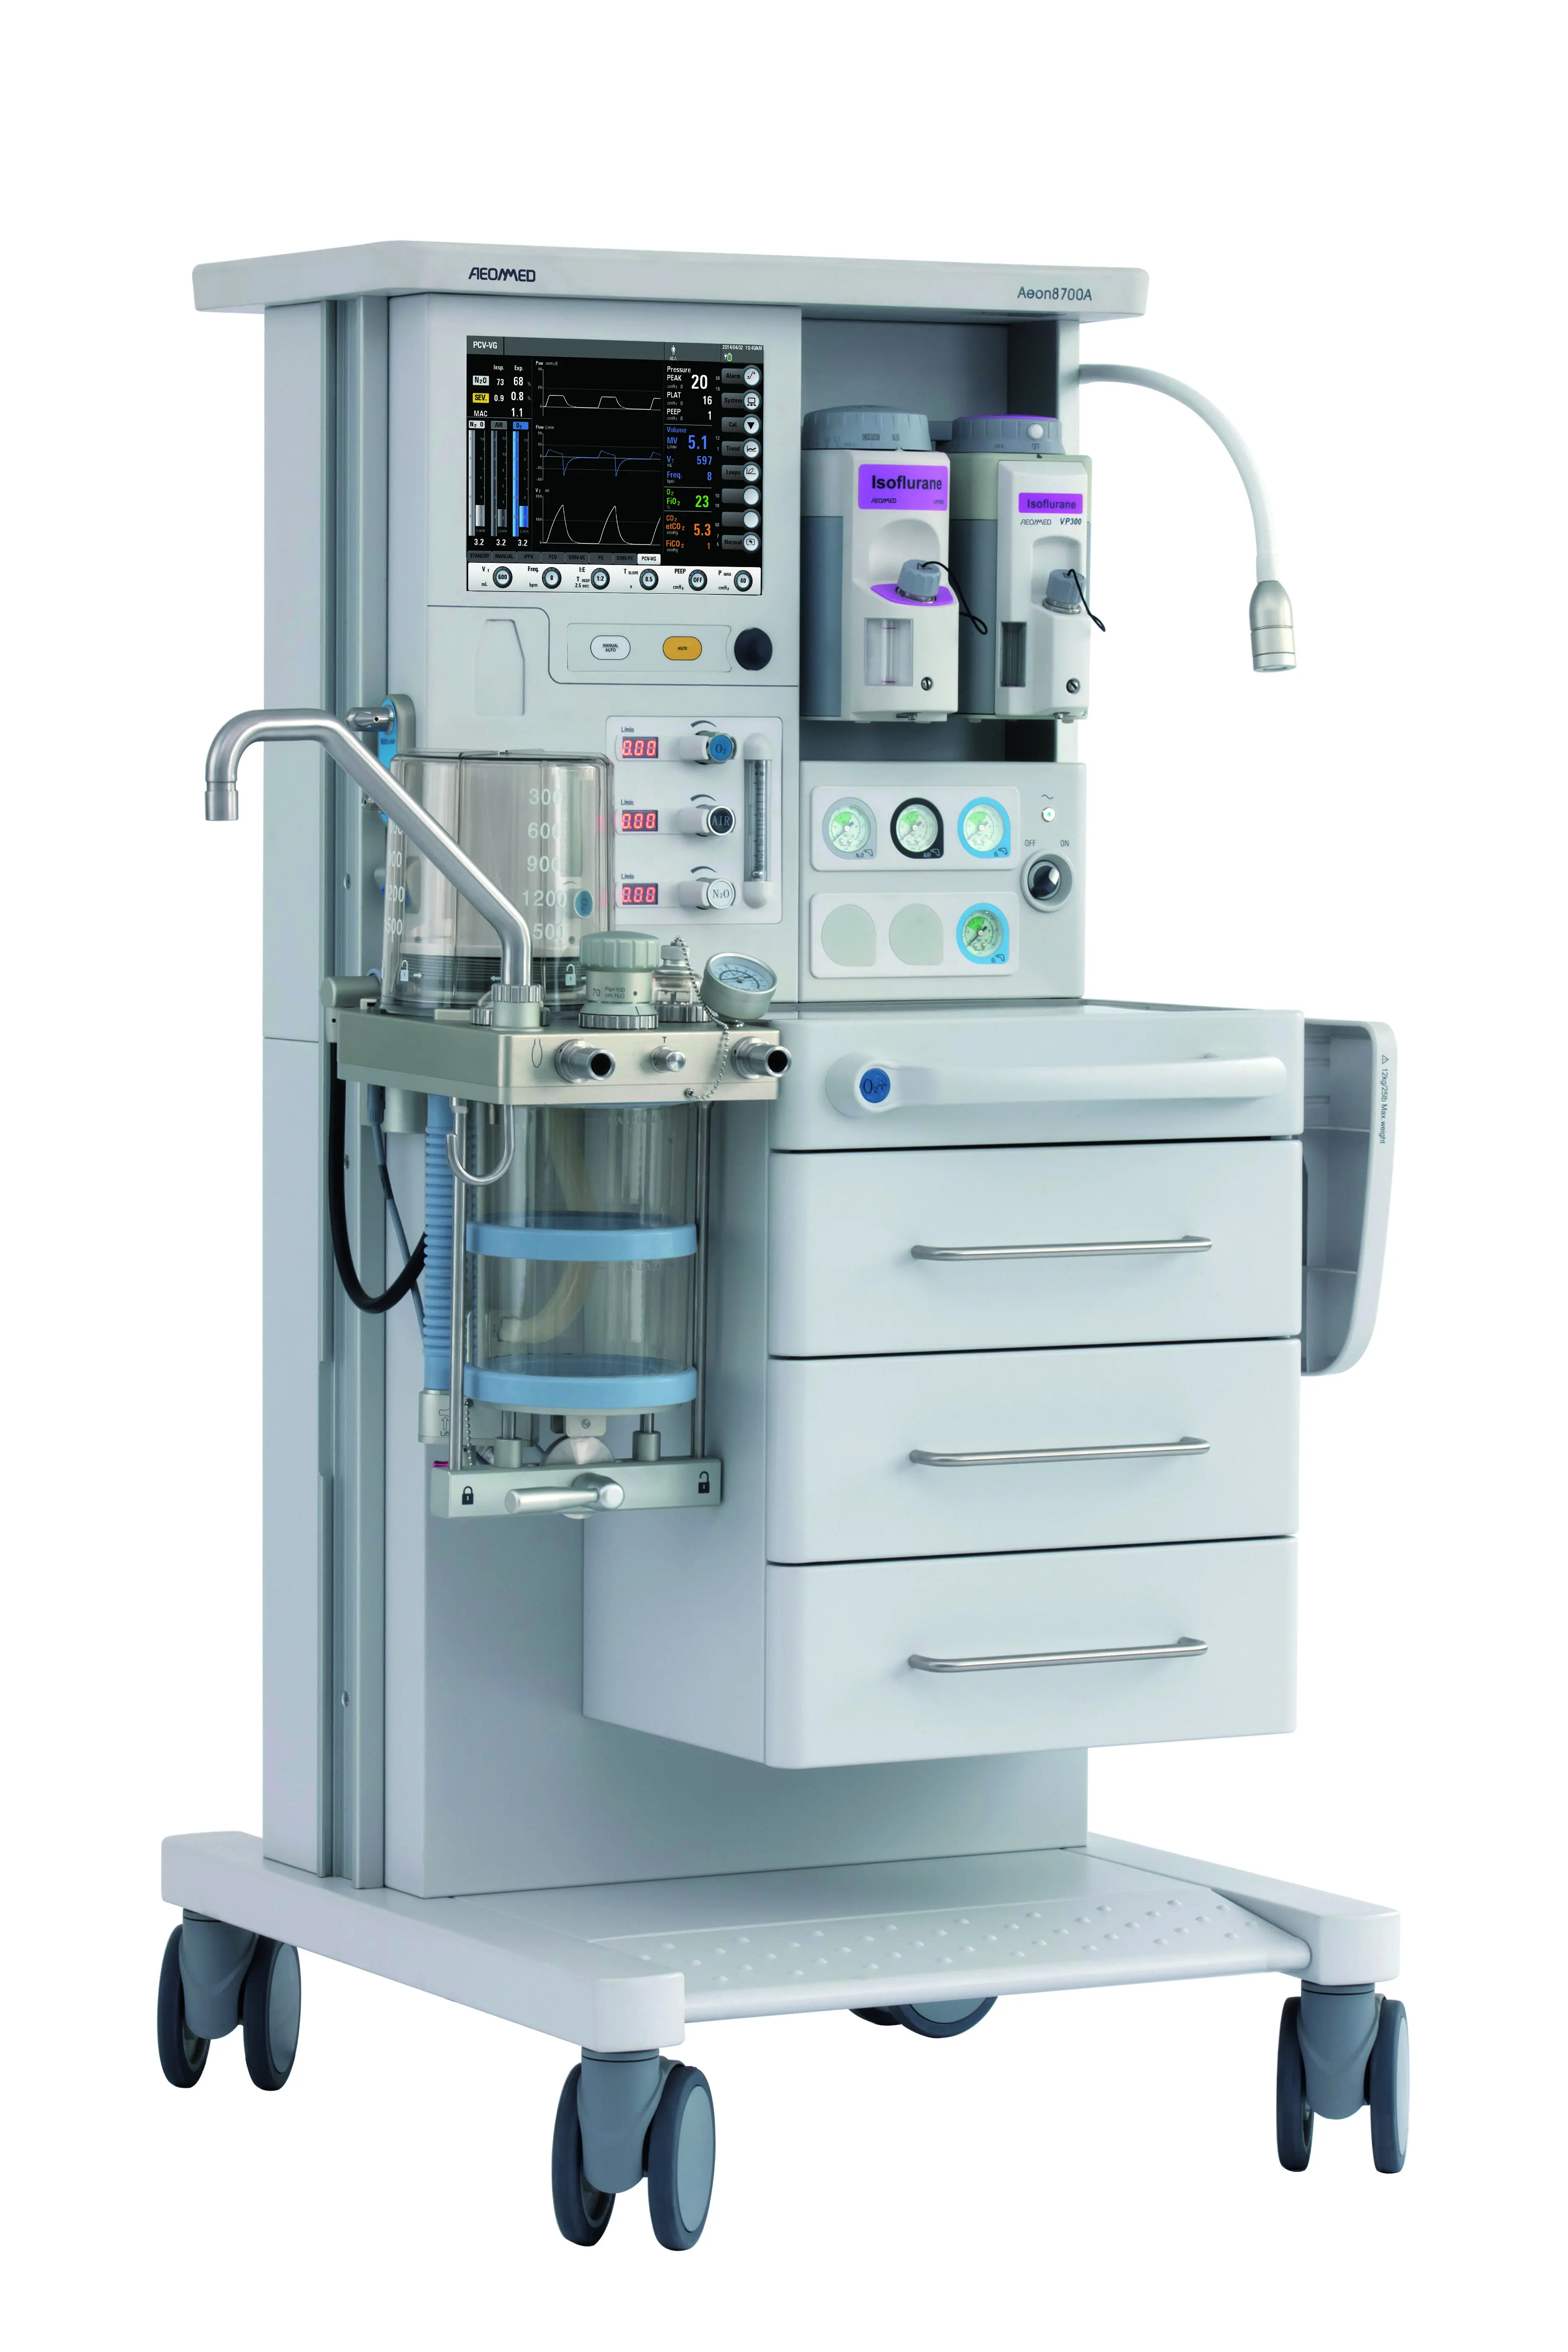 Anesthesia Digital Workstation Affordable With CE Aeonmed 8700A Surgery And ICU Paramagnetic Oxygen Large TFT Touch